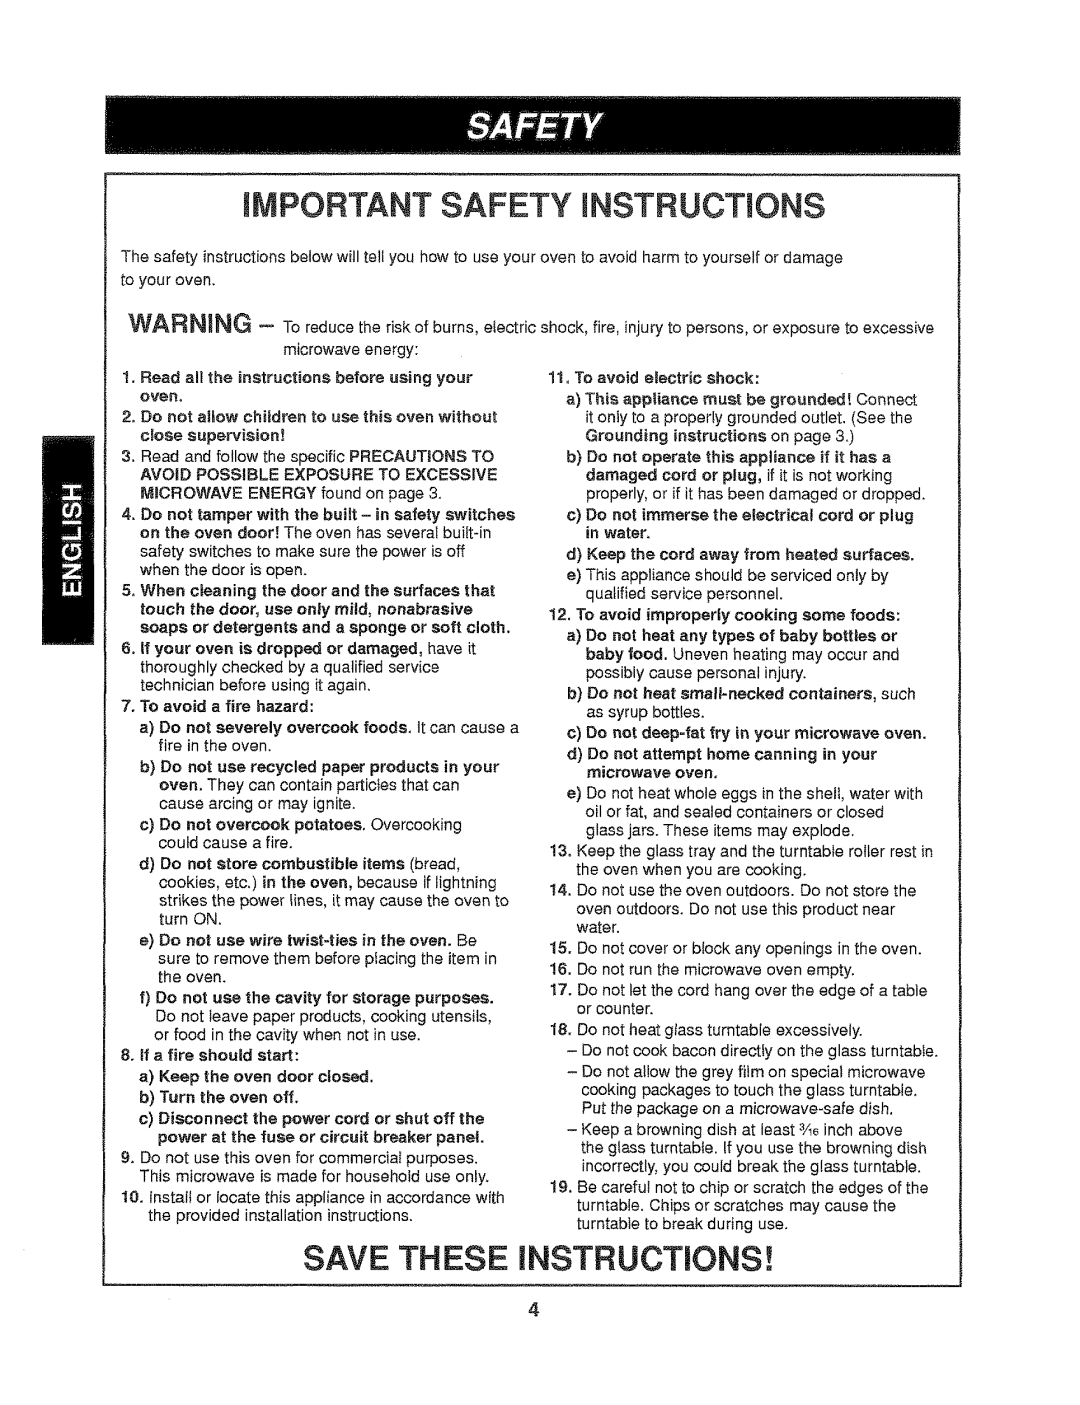 Kenmore 721.61282, 721.61289 manual iMPORTANT SAFETY MNSTRUCTIONS, Save These Instructions, to your oven, microwave energy 